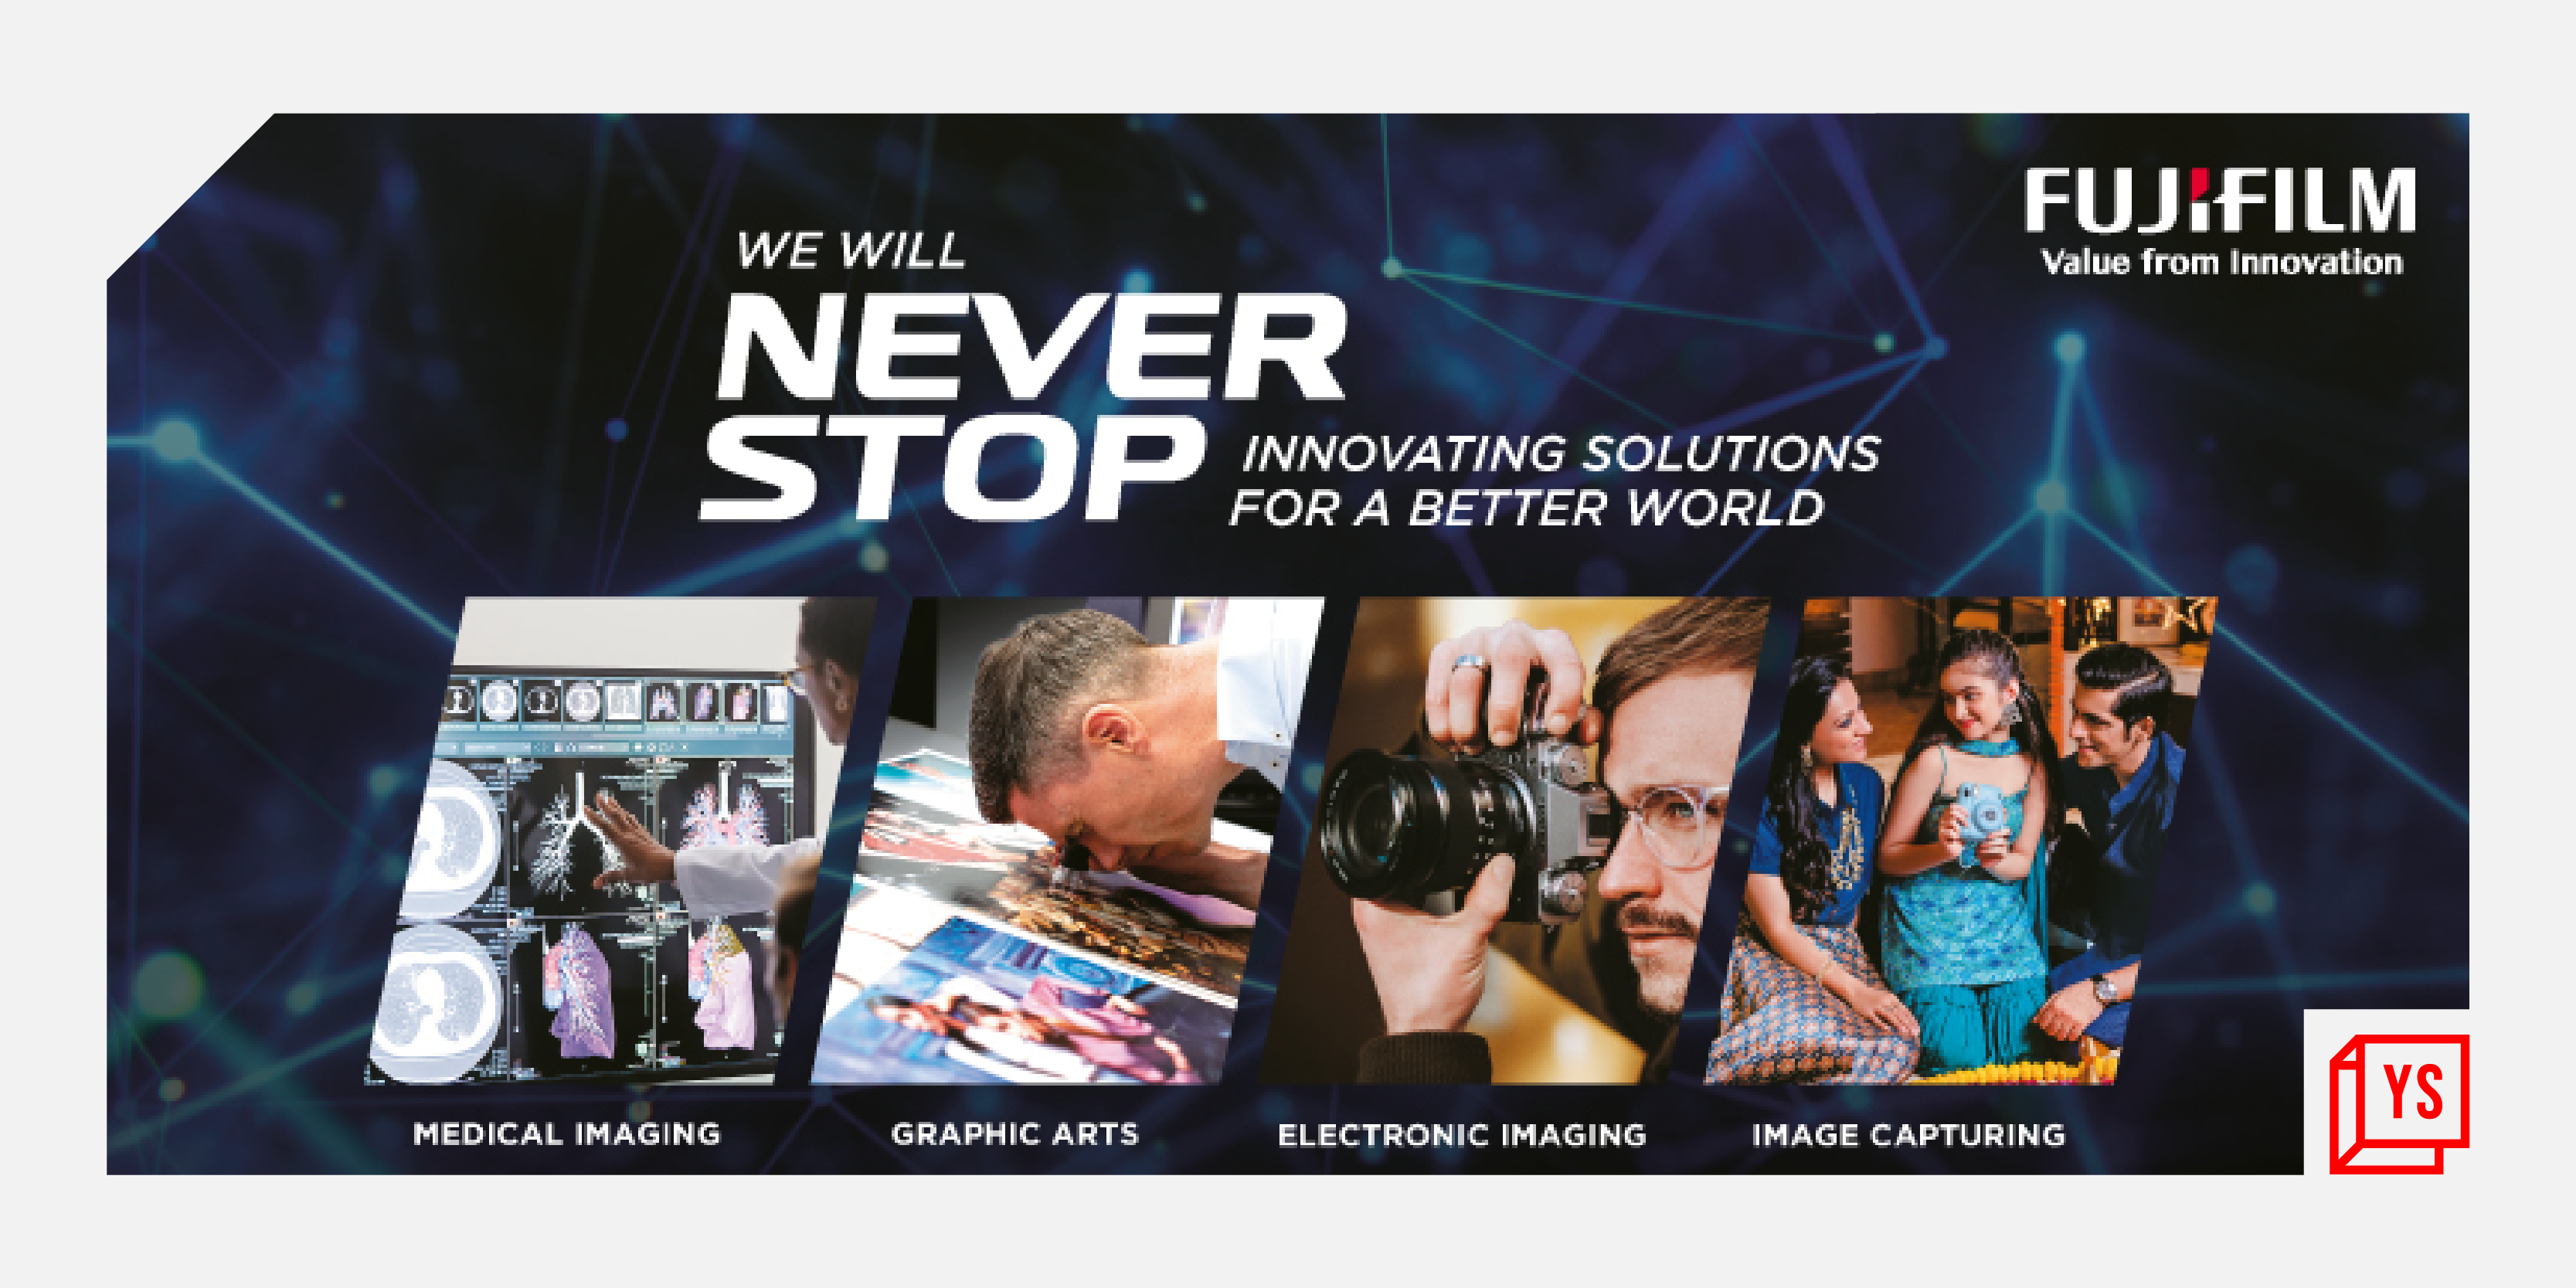 Fujifilm focuses on sustainable healthcare solutions with NEVER STOP campaign

